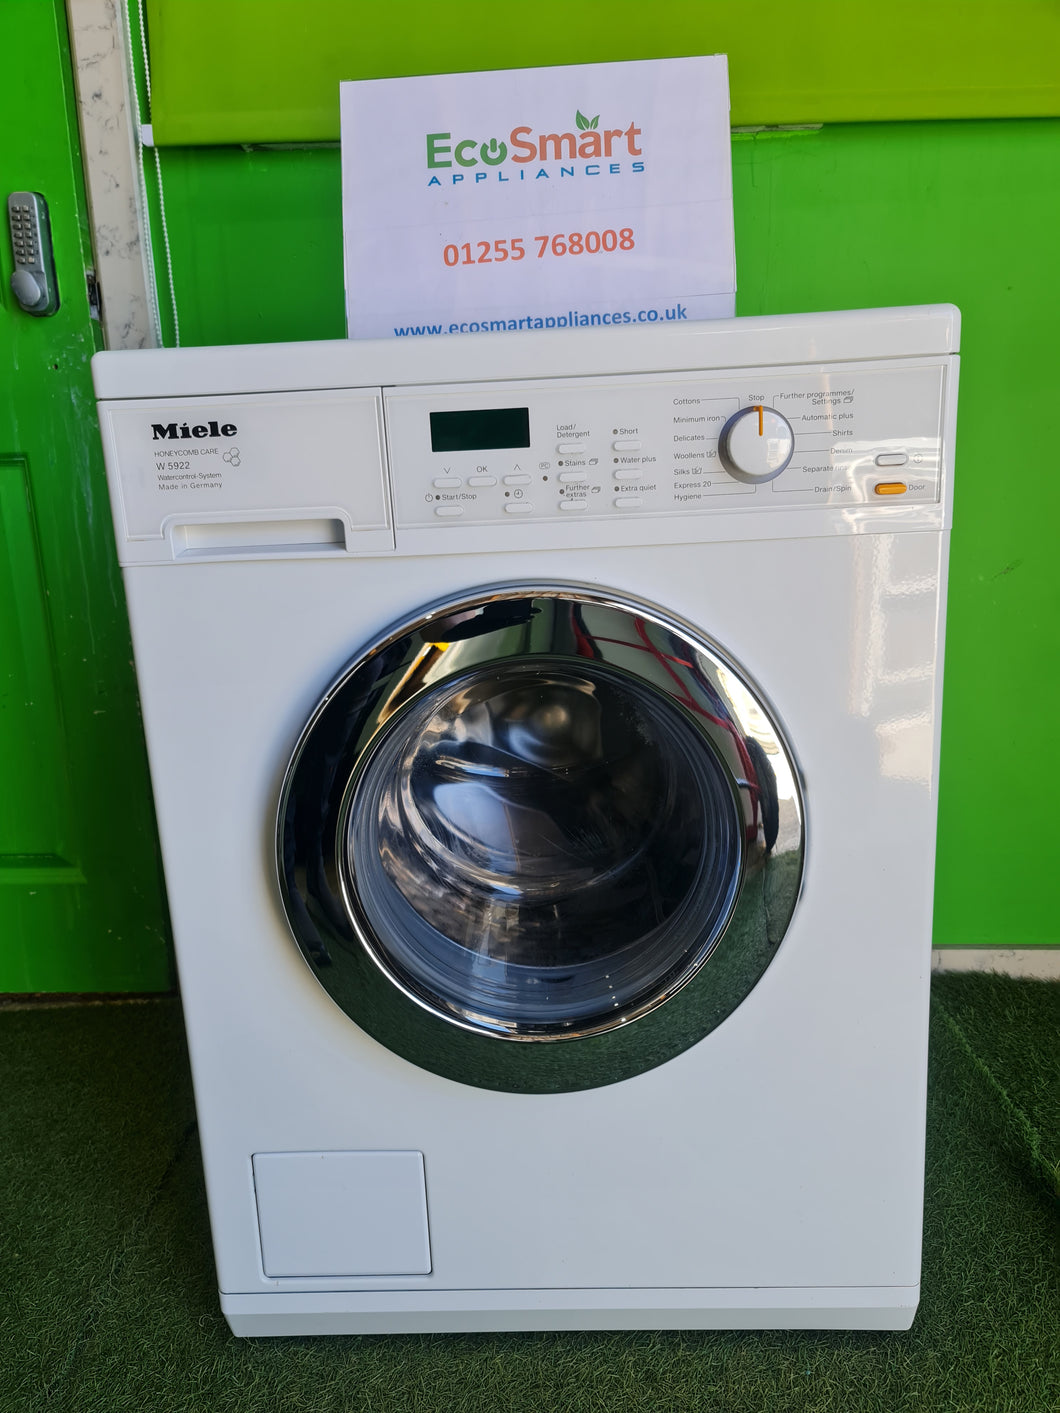 EcoSmart Appliances - Miele 7kg 1600rpm Washing Machine with 6 Months Warranty Included (1408)